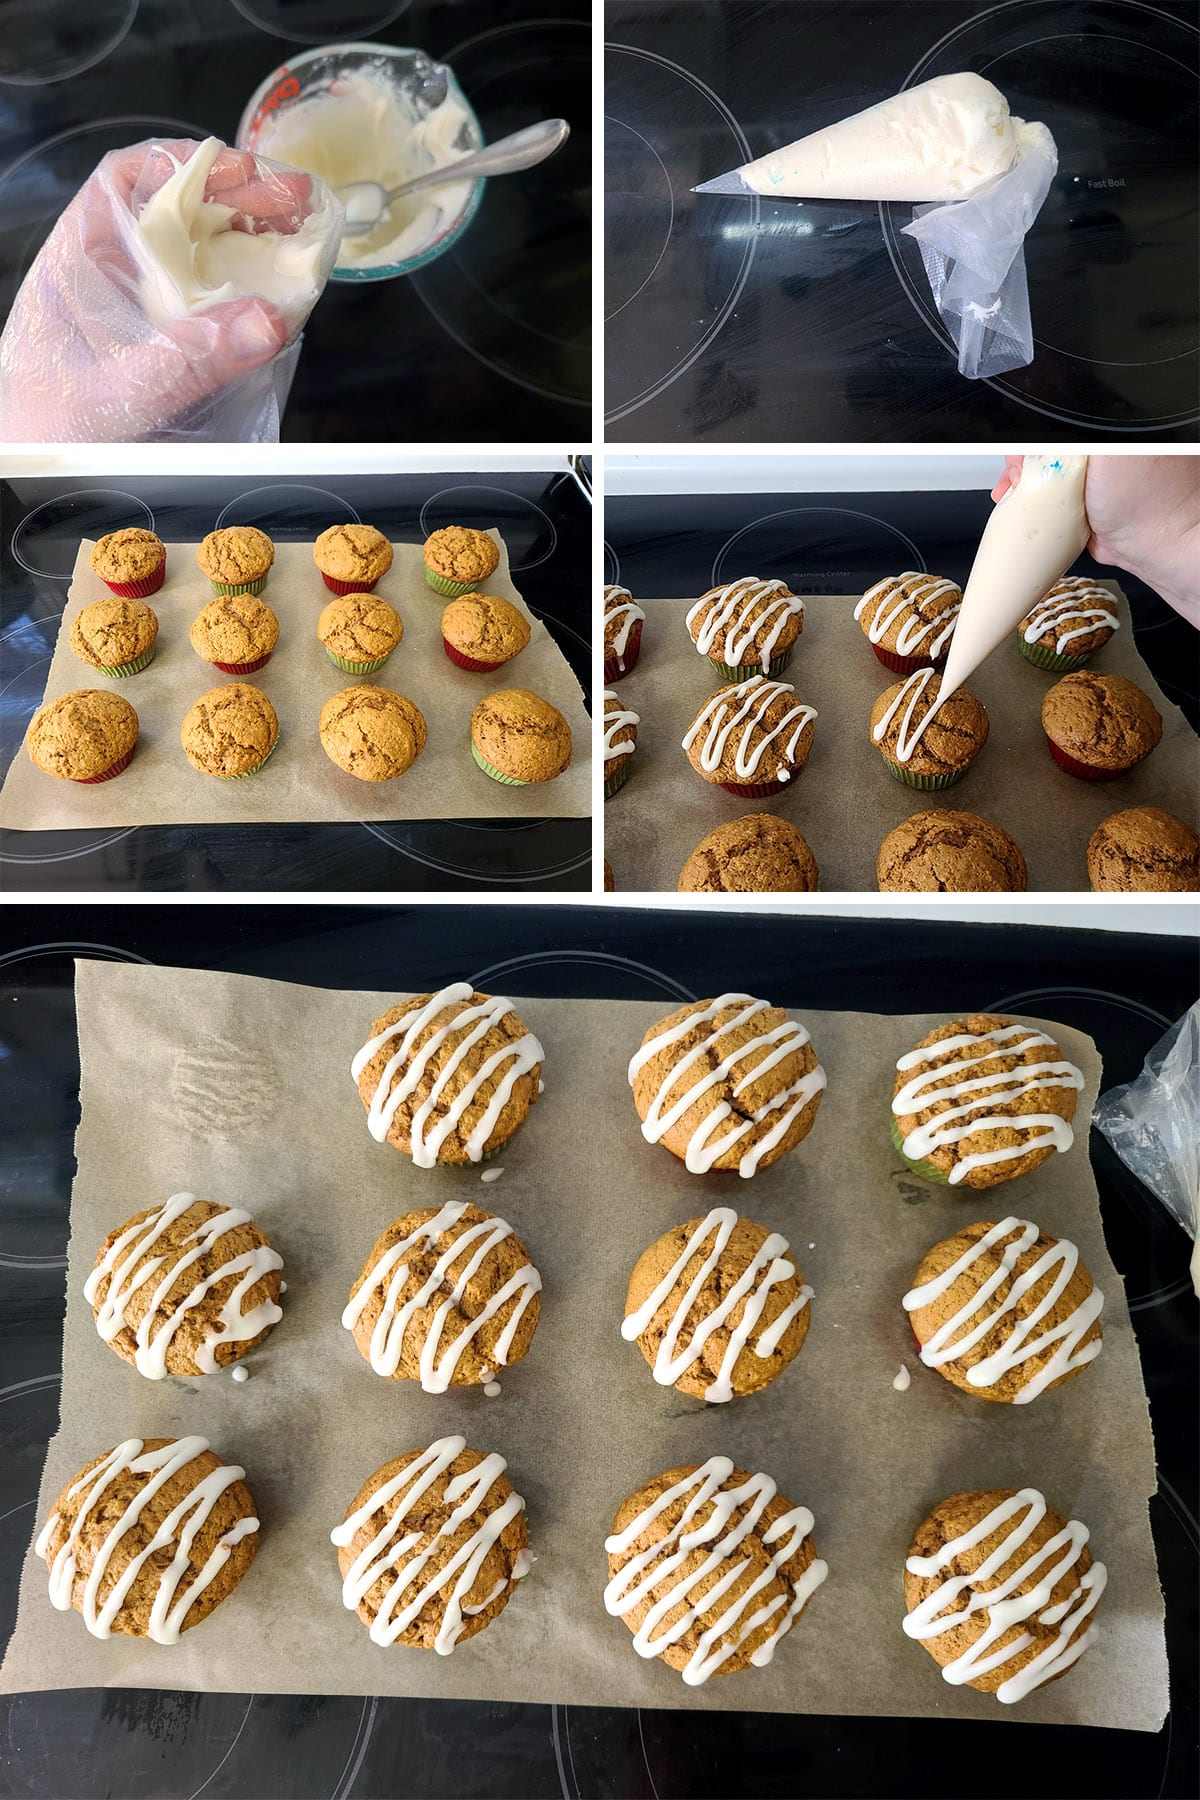 A 5 part image showing the frosting being put into a piping bag and drizzled over the muffins.